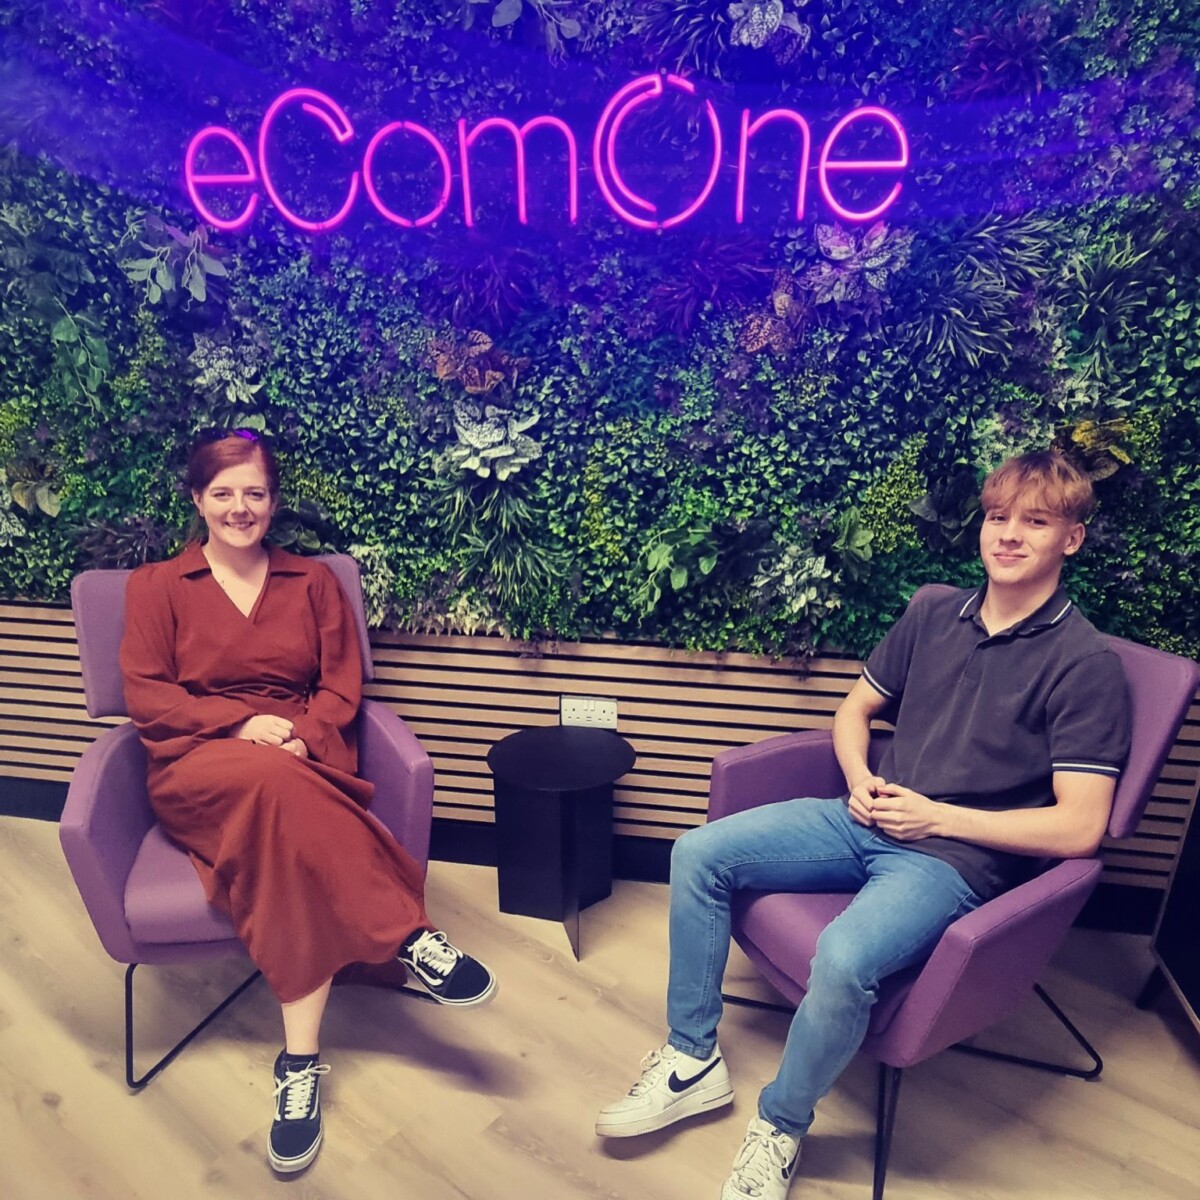 carrianne and travis infront of the ecomone sign